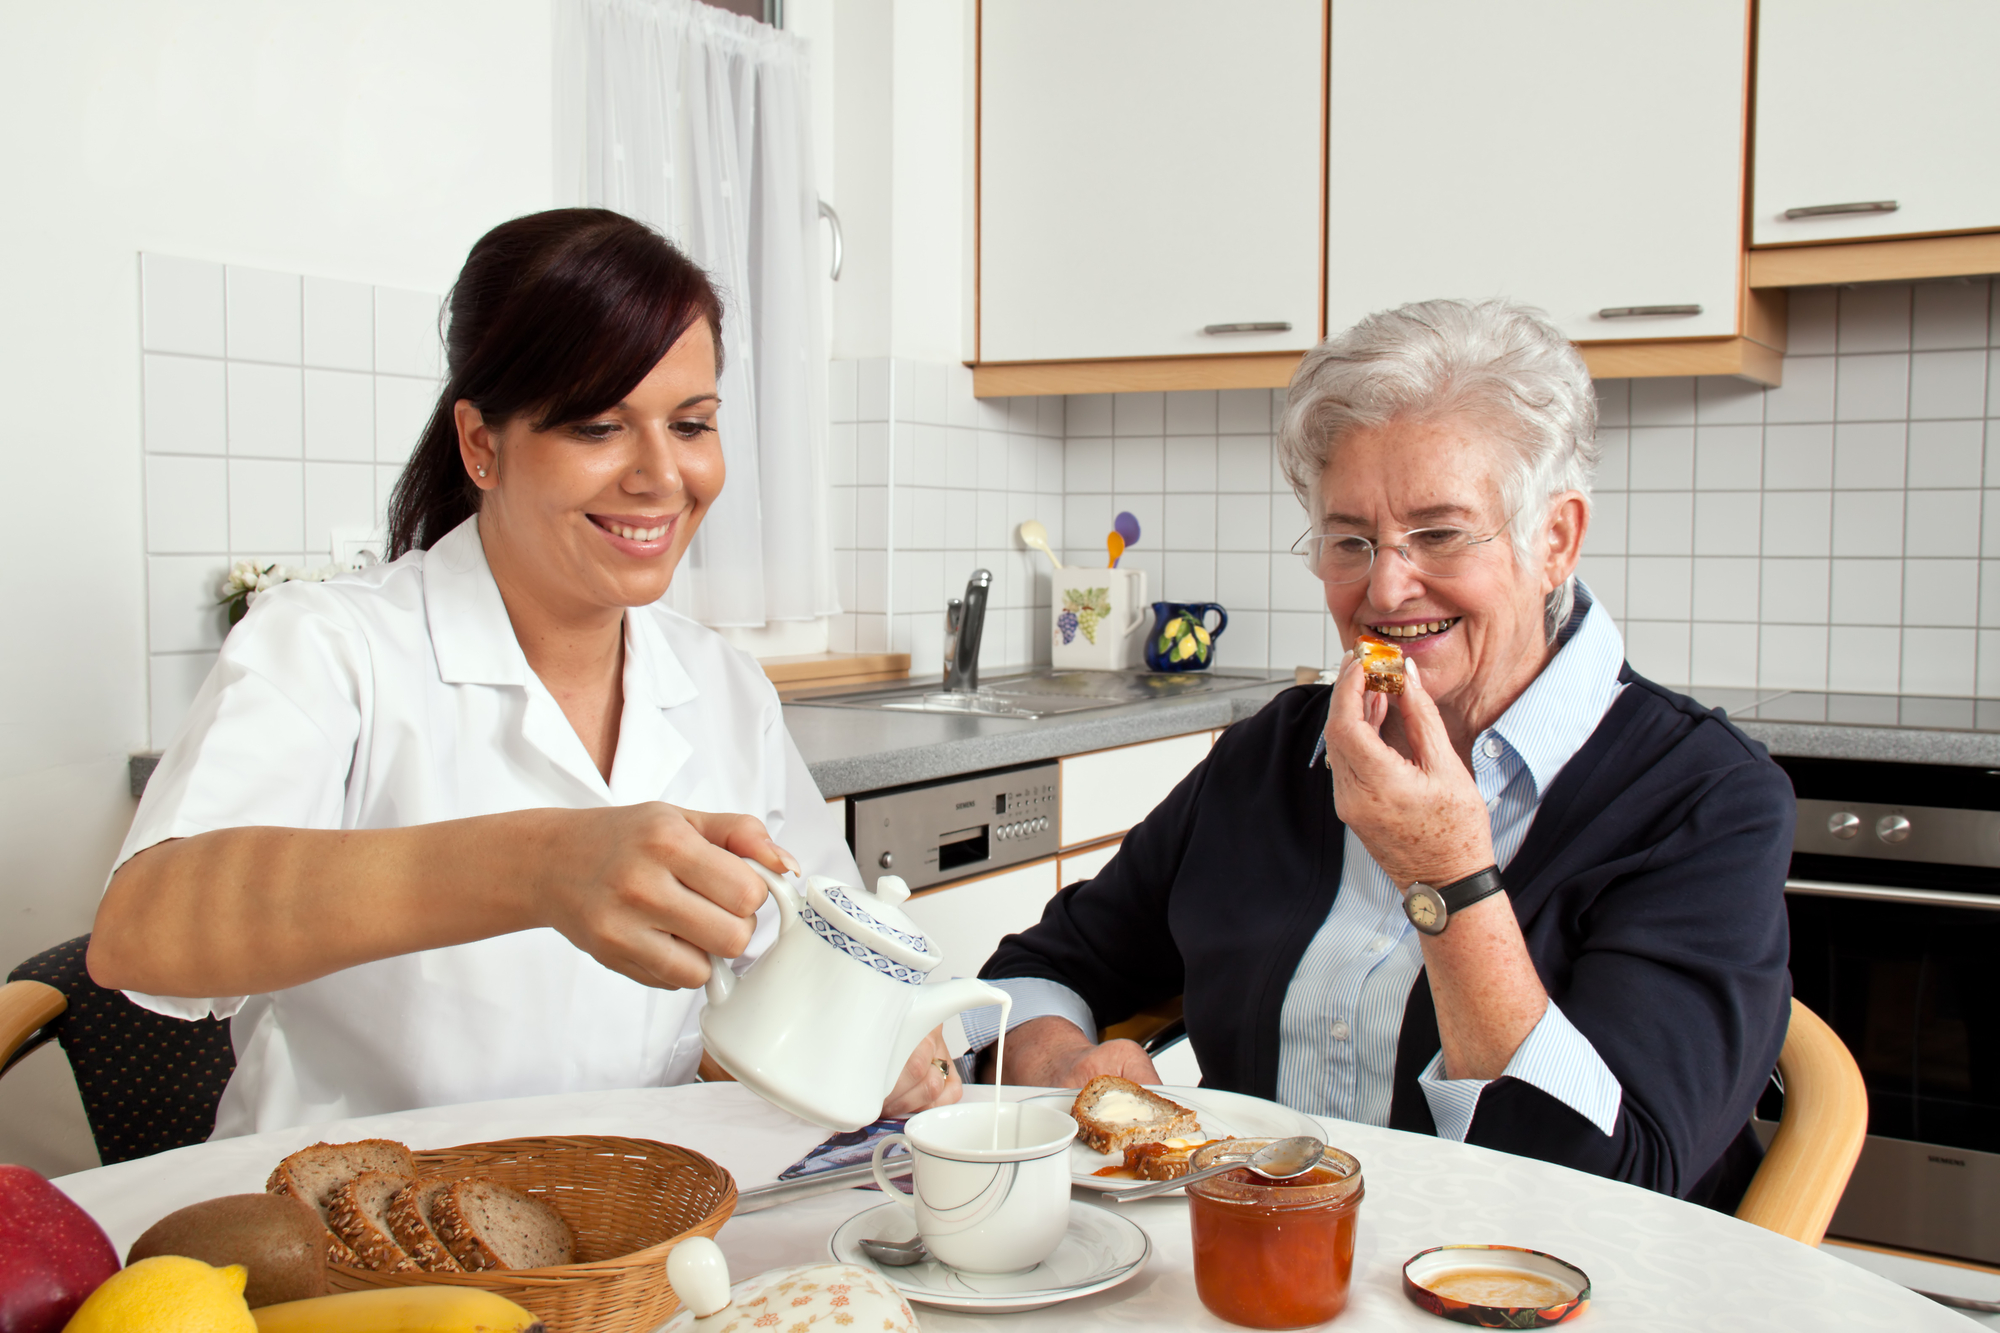 Two individuals sitting at a table in a home kitchen sharing breakfast; the younger person on the left pours cream into a teacup for a senior individual on the right, both smiling.